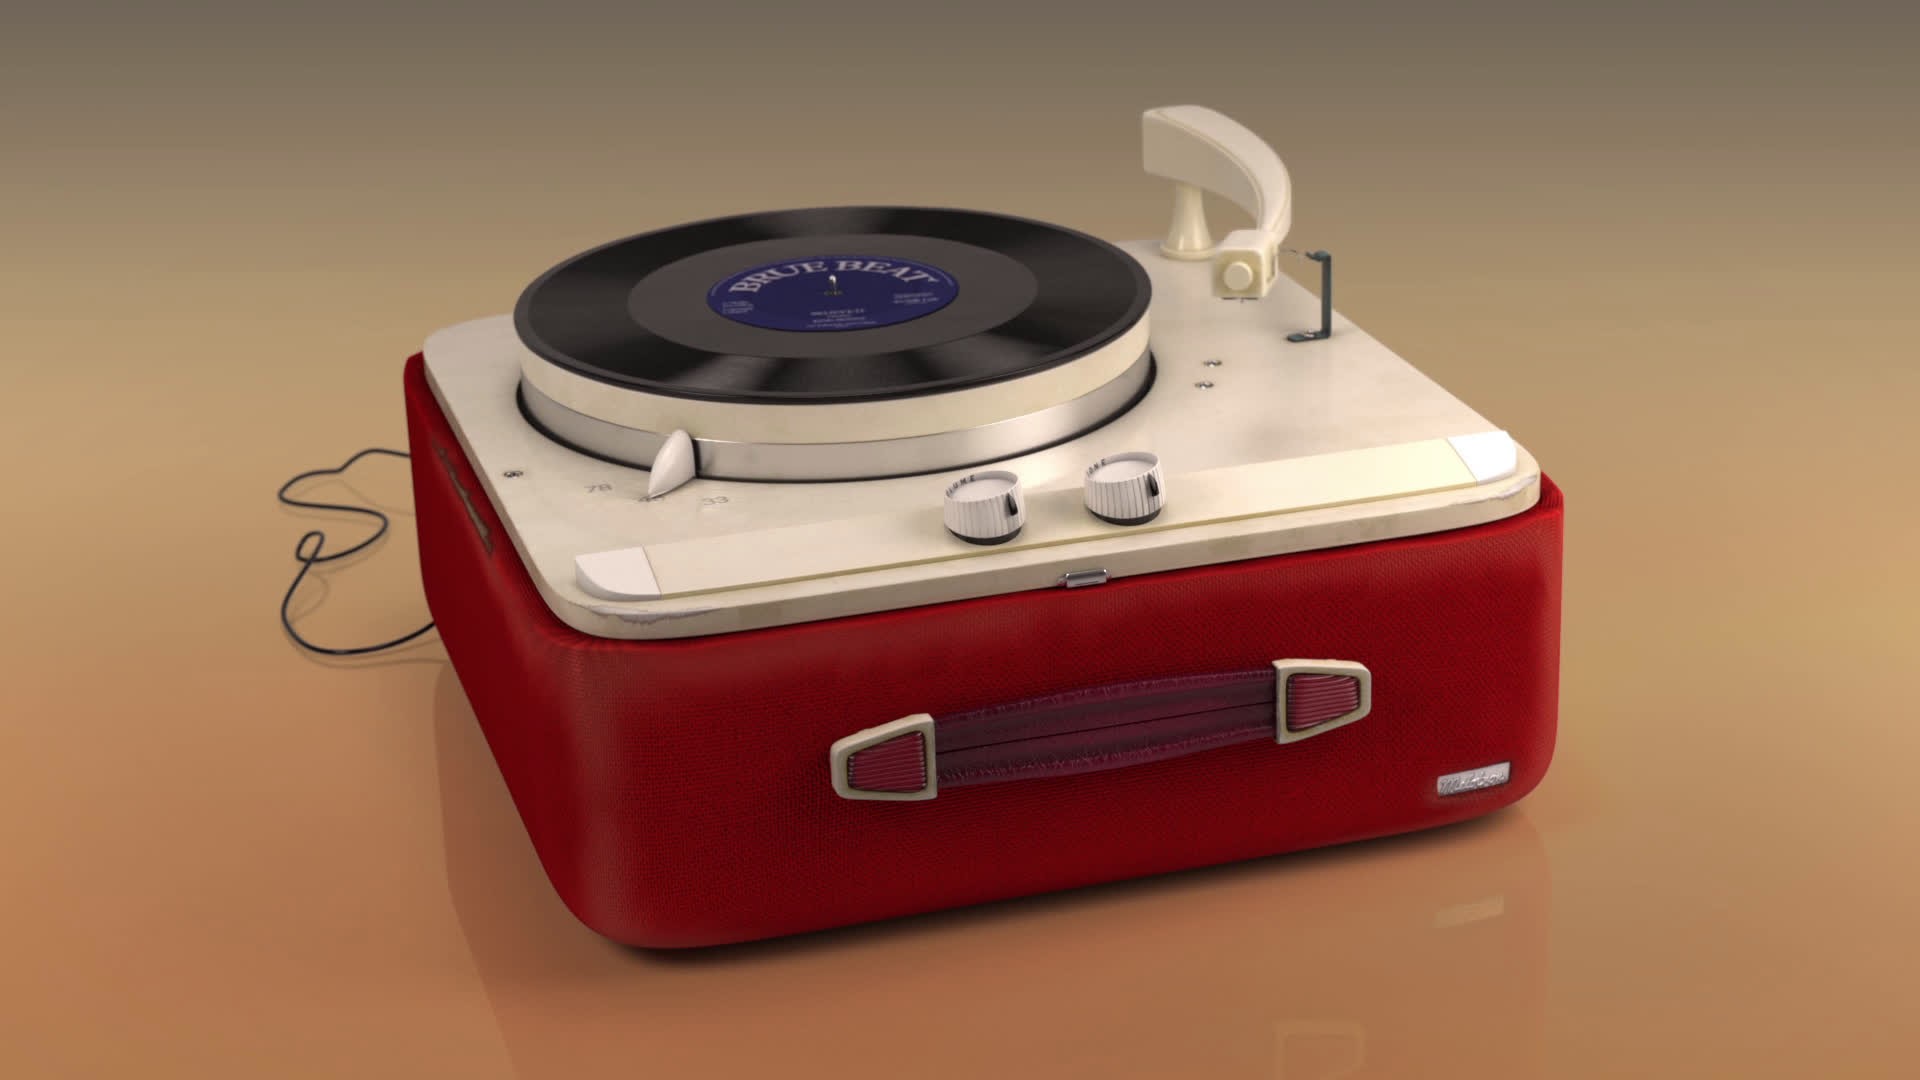 THE RECORD PLAYER WITH TYPE 2 DIABETES